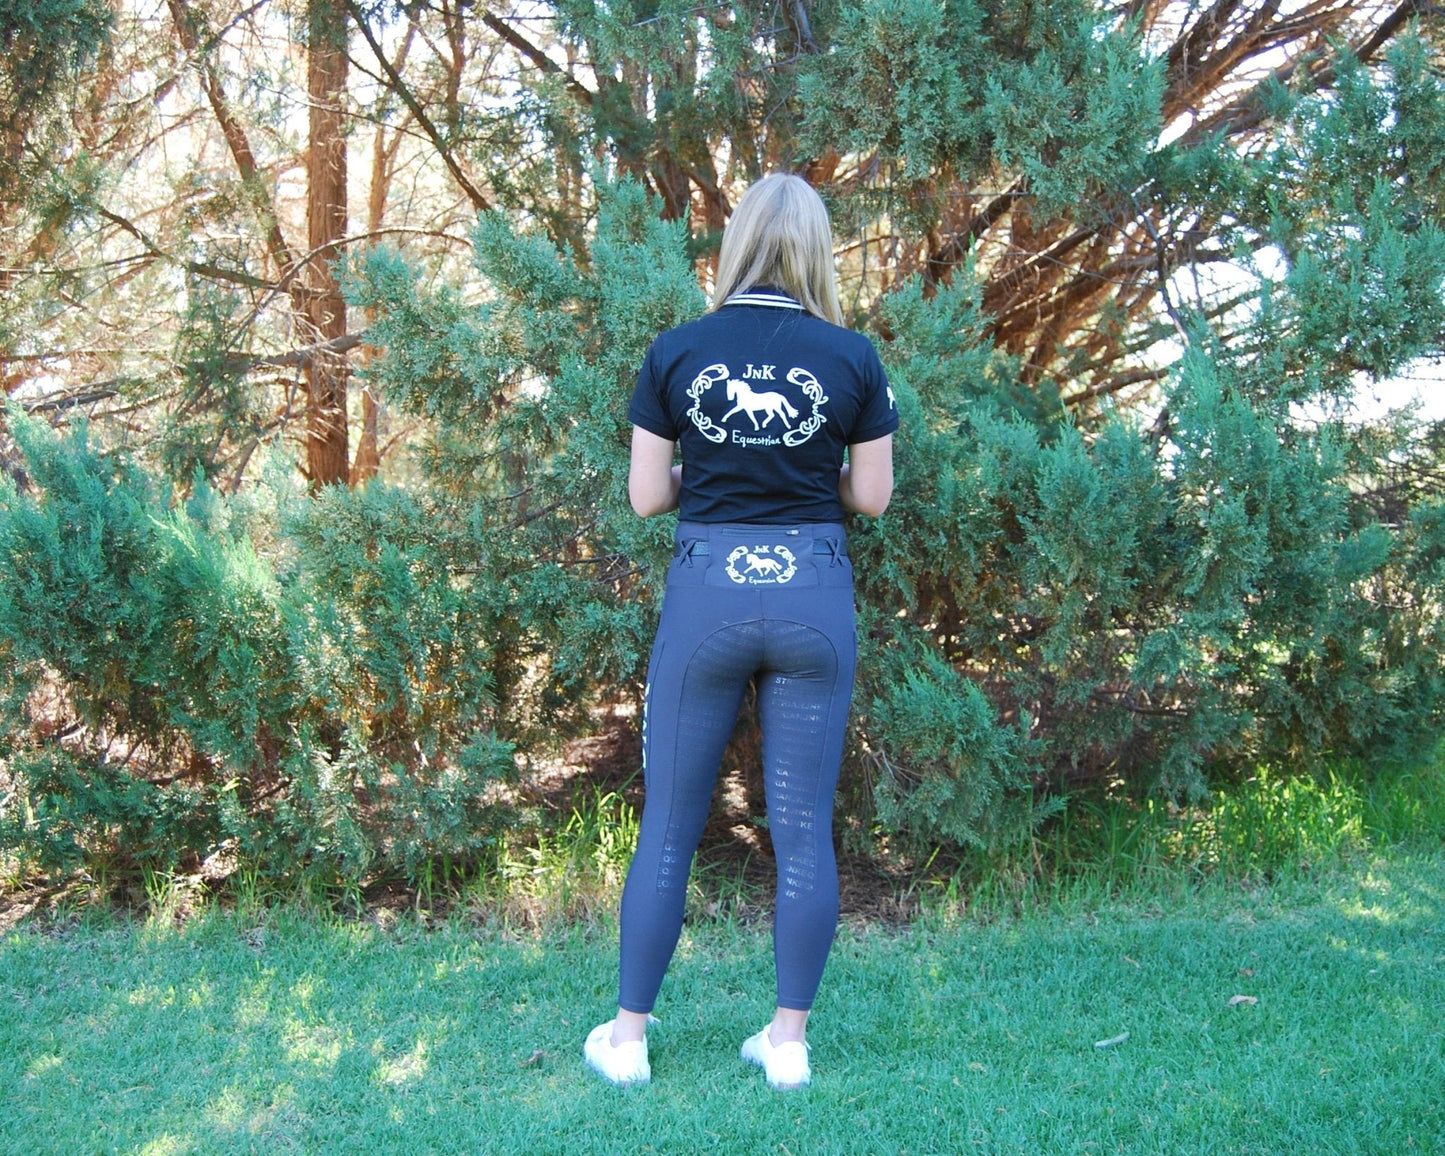 Woman standing in garden wearing horse riding tights and black shirt.